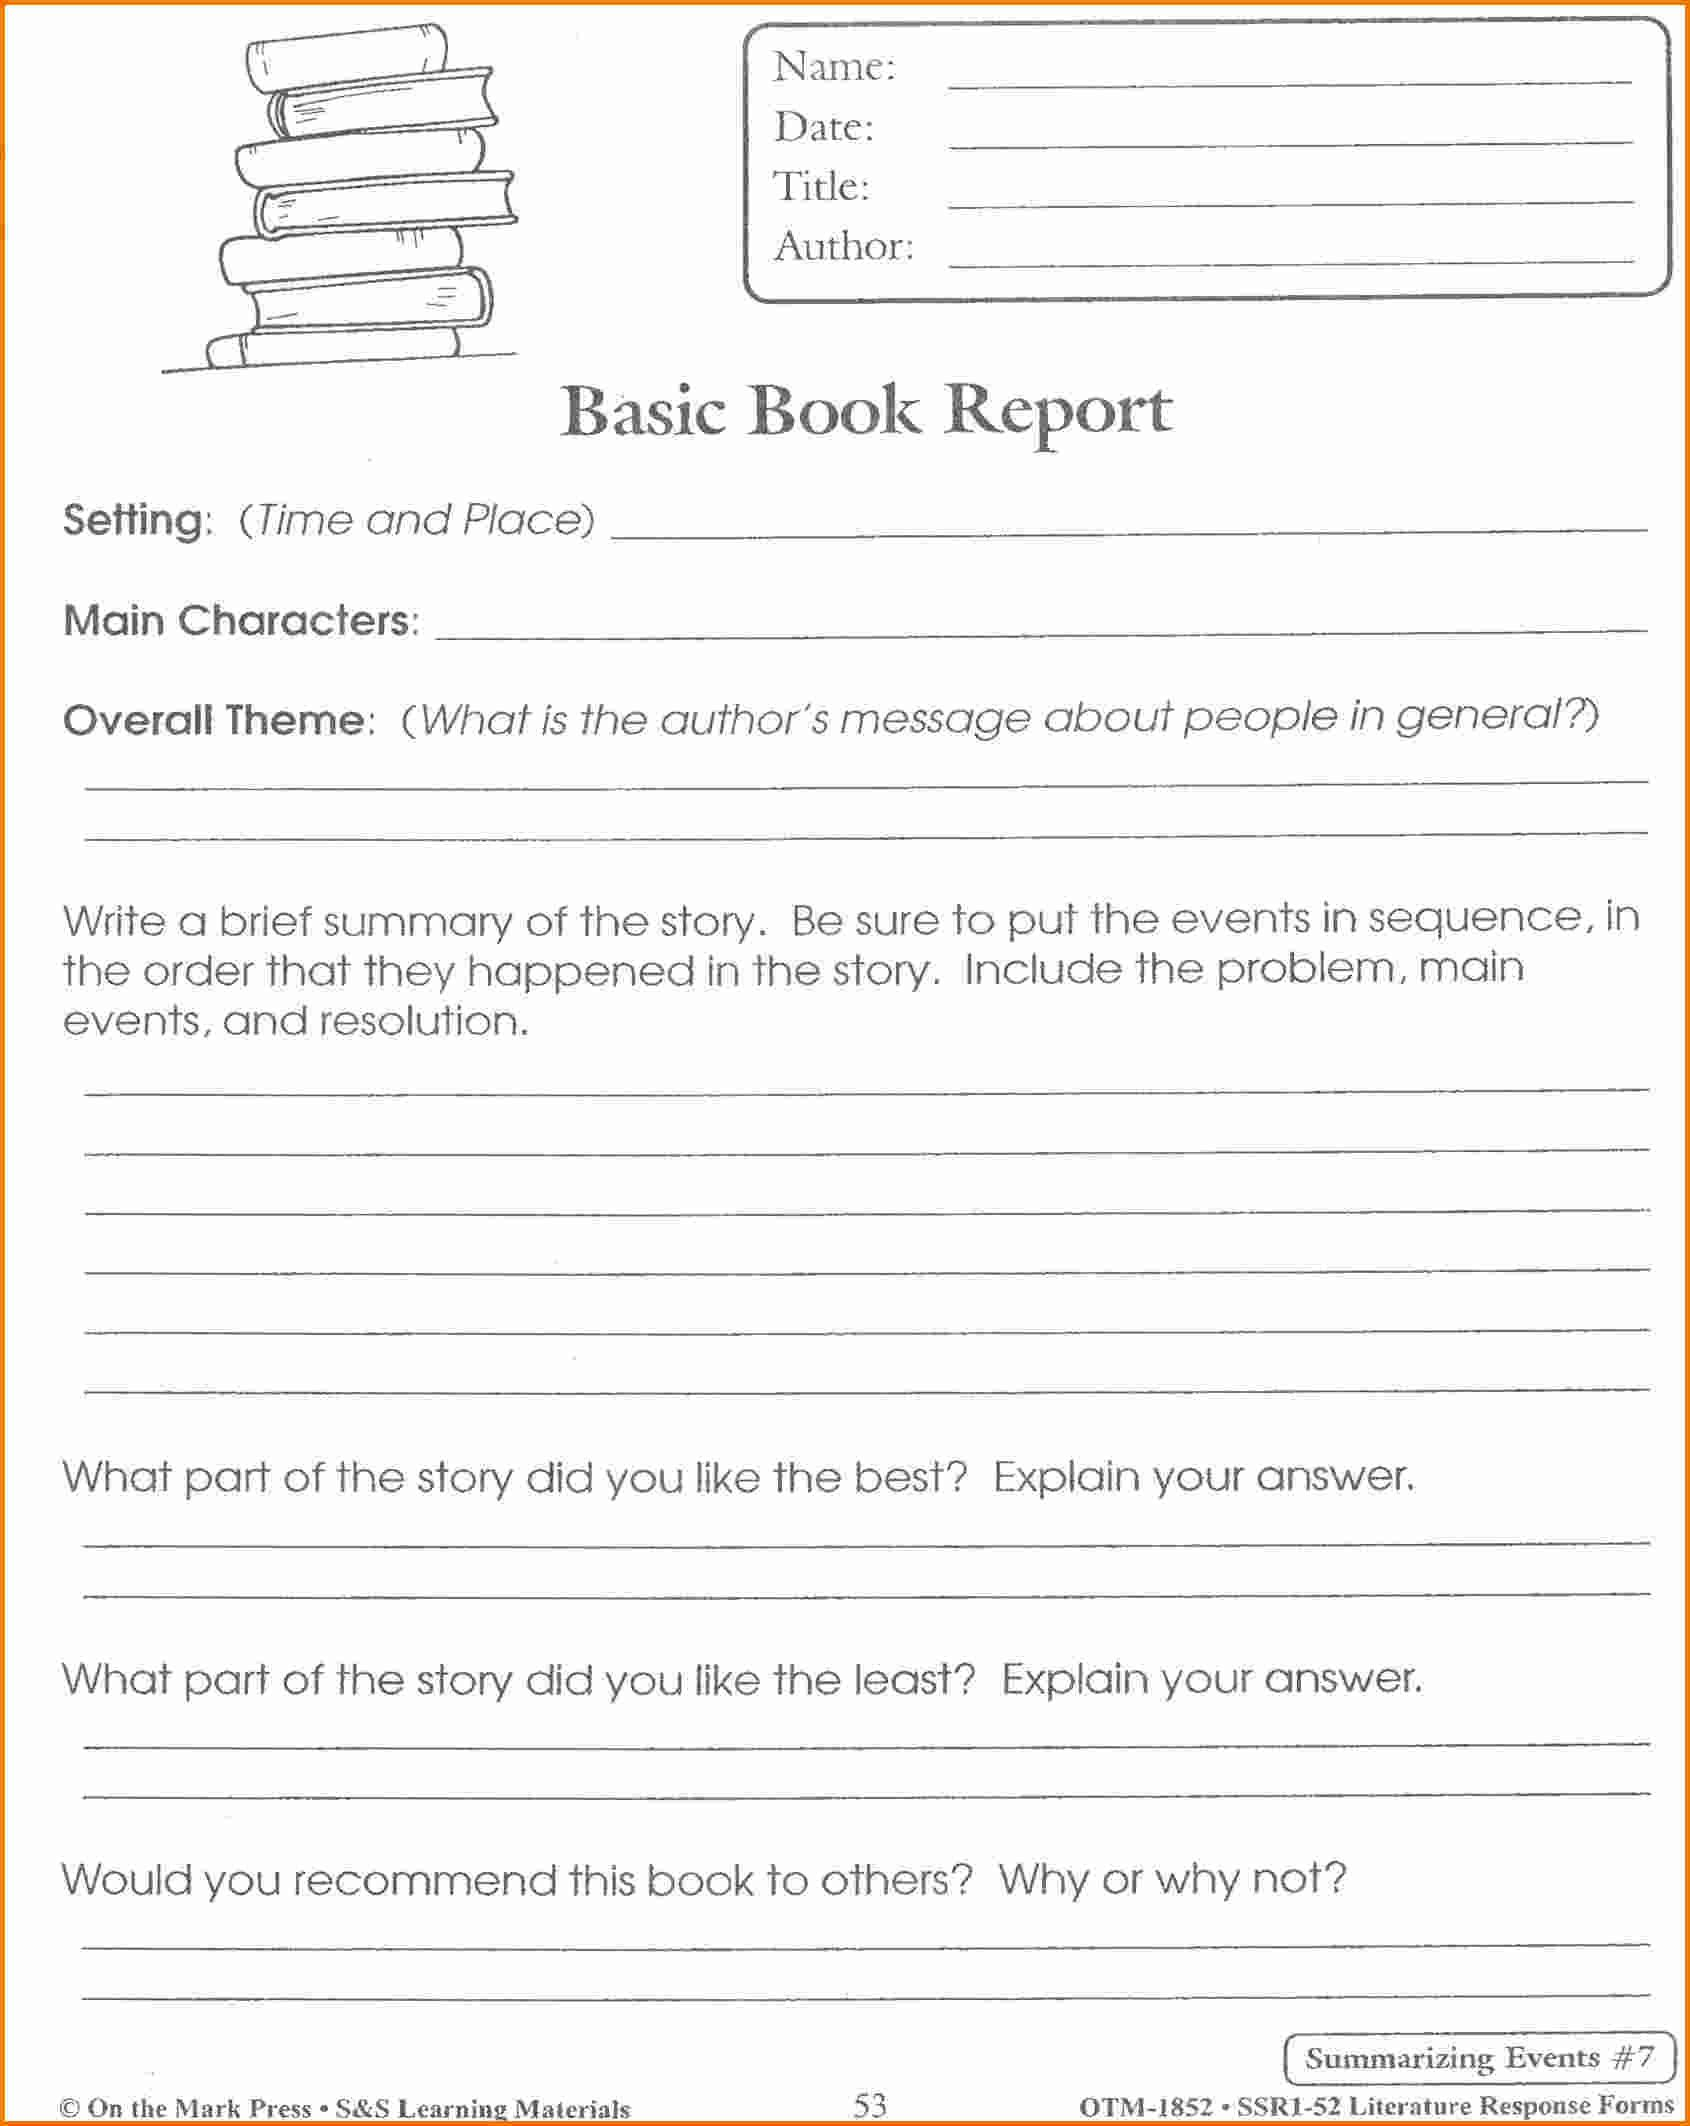 Pinmarcus Tong On Book | Book Report Templates, Book Inside 4Th Grade Book Report Template